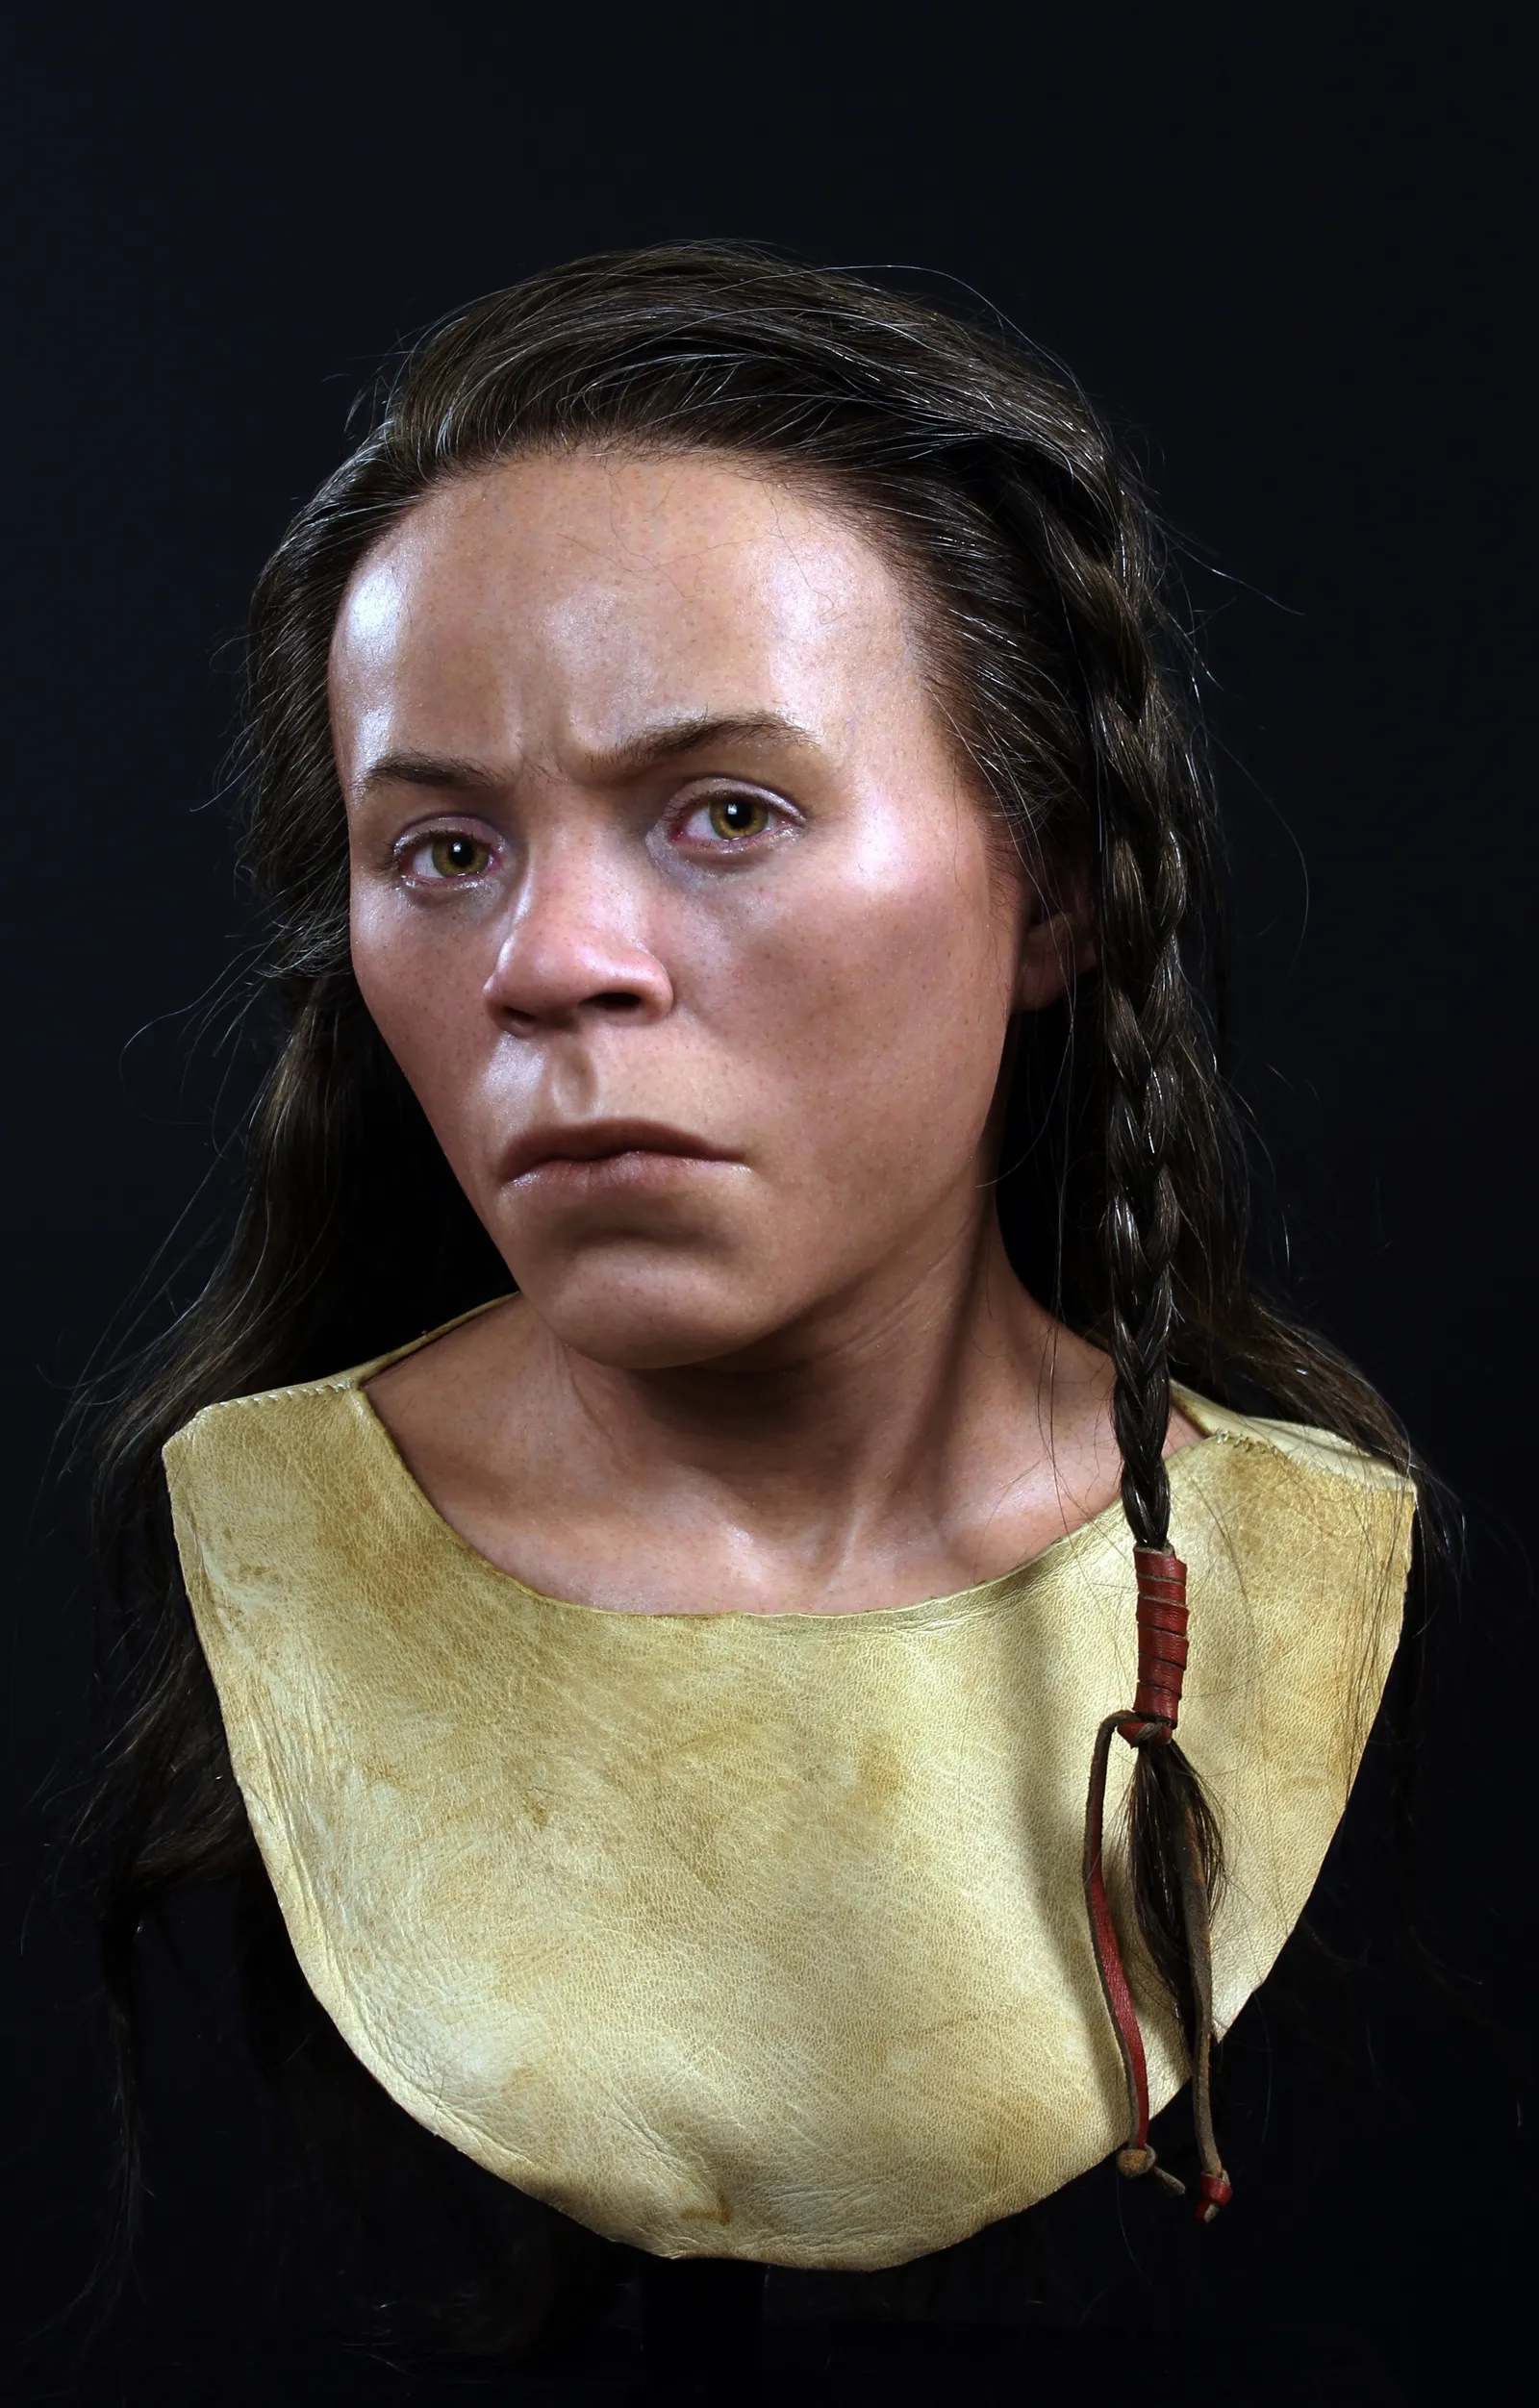 See the Face of a Bronze Age Woman Who Lived in Scotland 4,000 Years Ago